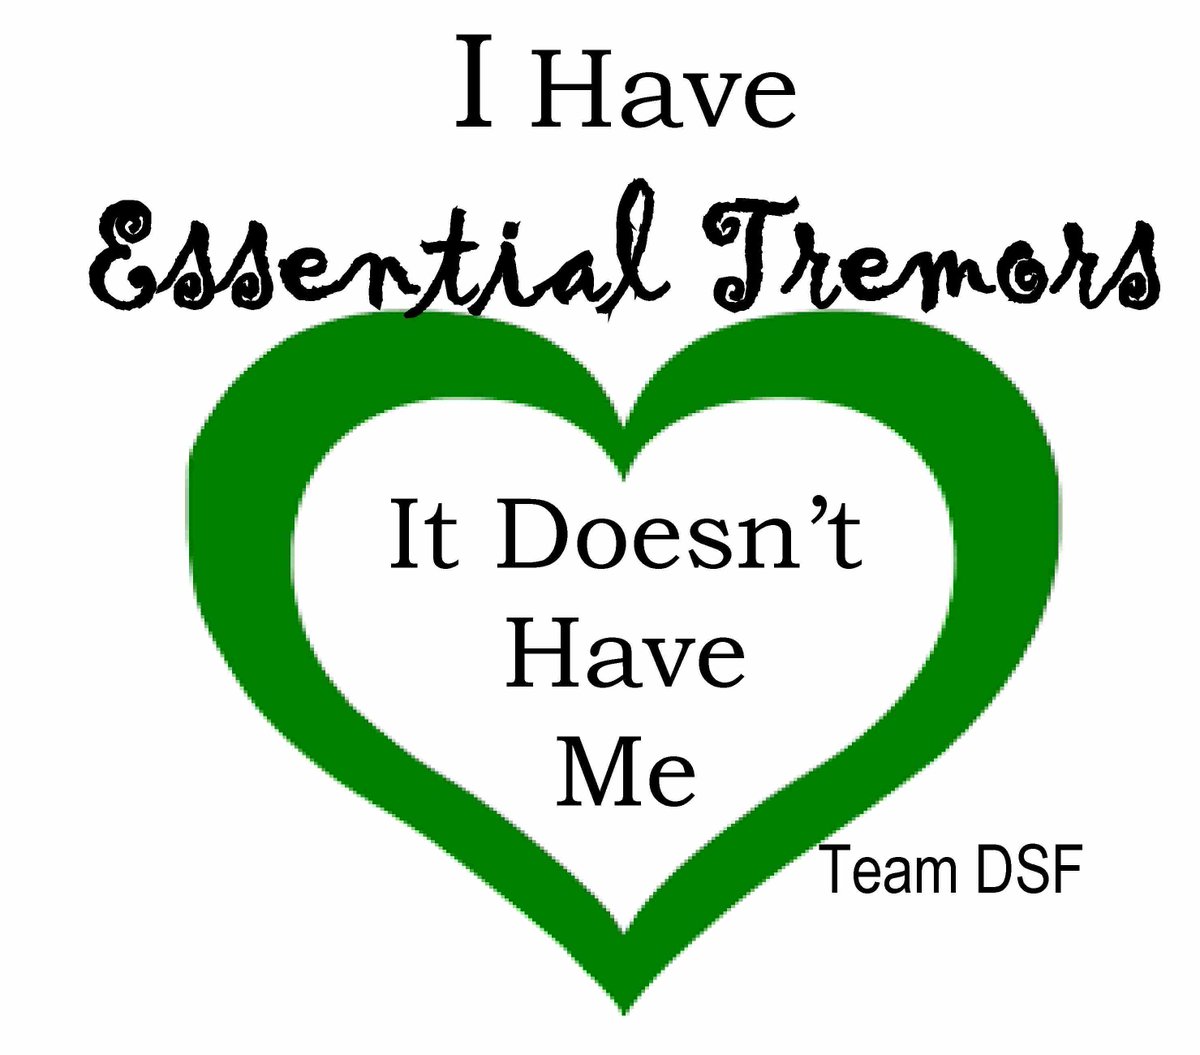 I have Essential Tremors! It Doesn't Have Me! March is Essential Tremor Month & March 16th, is World Essential Tremor Day of Awareness #essentialtremor #teamdsf #endet #marchetmonth diannshaddoxfoundation.org/march-et-month…